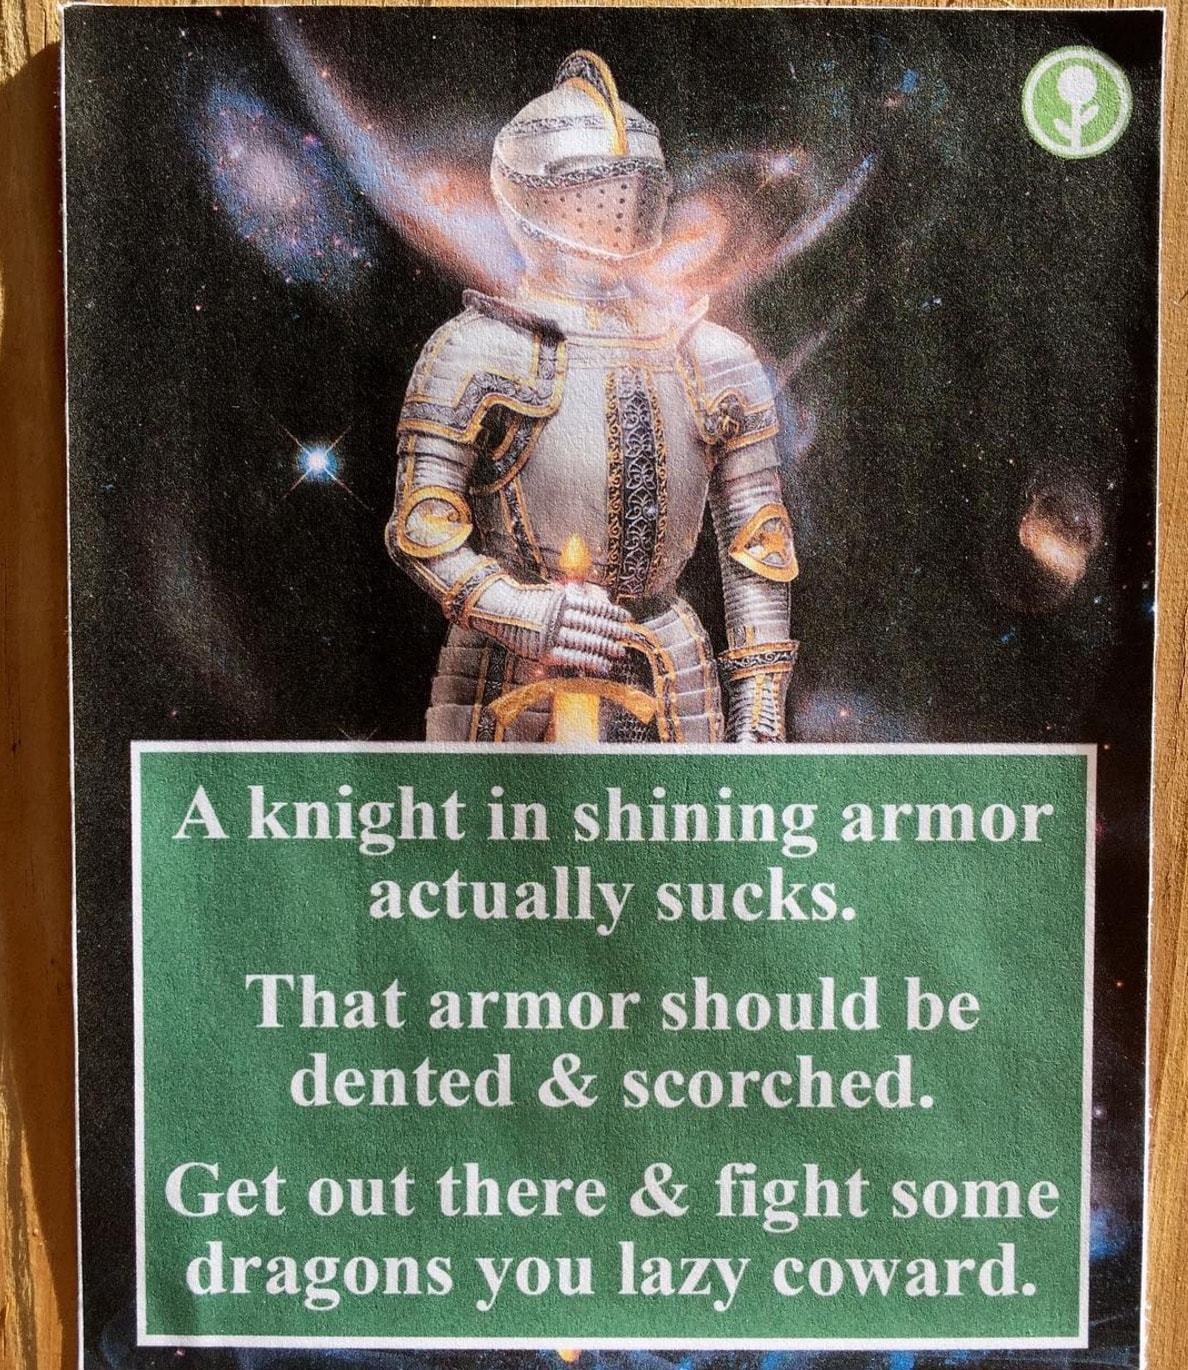 Melal One Agrin V Suese A knight in shining armor actually sucks. That armor should be dented & scorched. Get out there & fight some dragons you lazy coward.